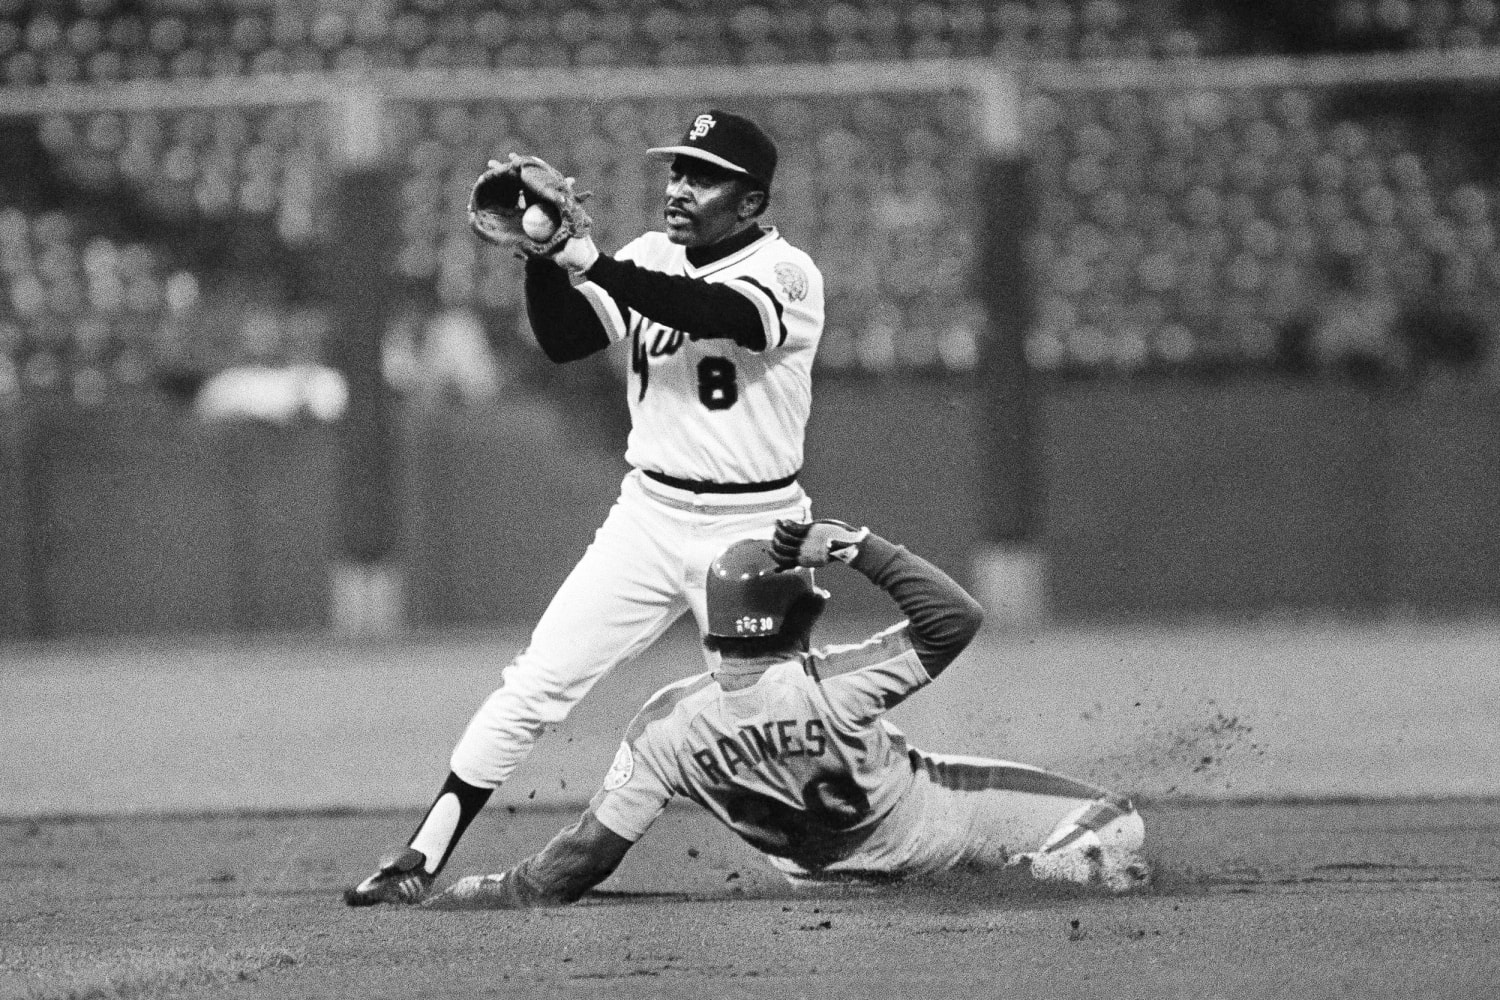 Cincinnati Reds - August 27, 1978: Joe Morgan hits his 200th career home  run, making him the first major leaguer ever with 200 homers and 500 stolen  bases. Morgan has since been